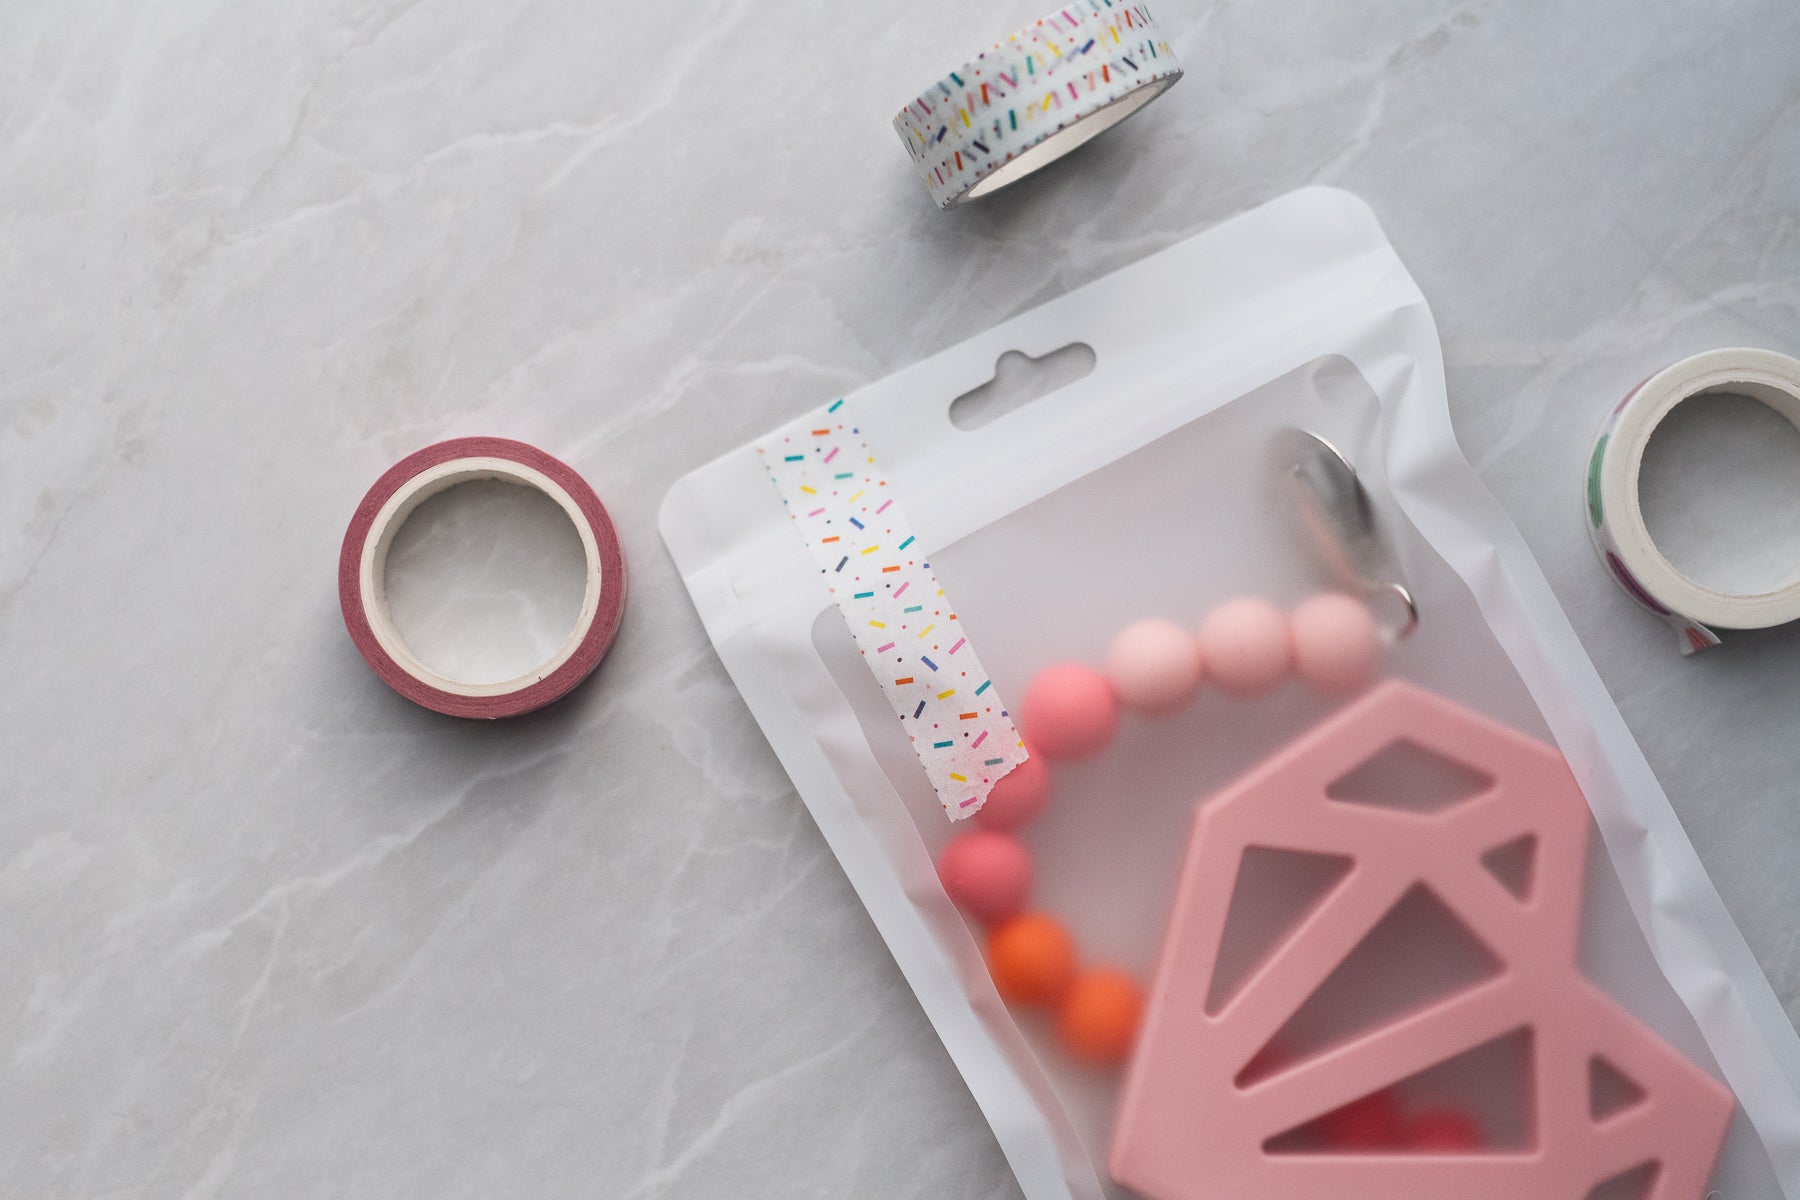 Amazing Packaging Hacks for your Handmade Small Business! - Cara & Co Blog Posts